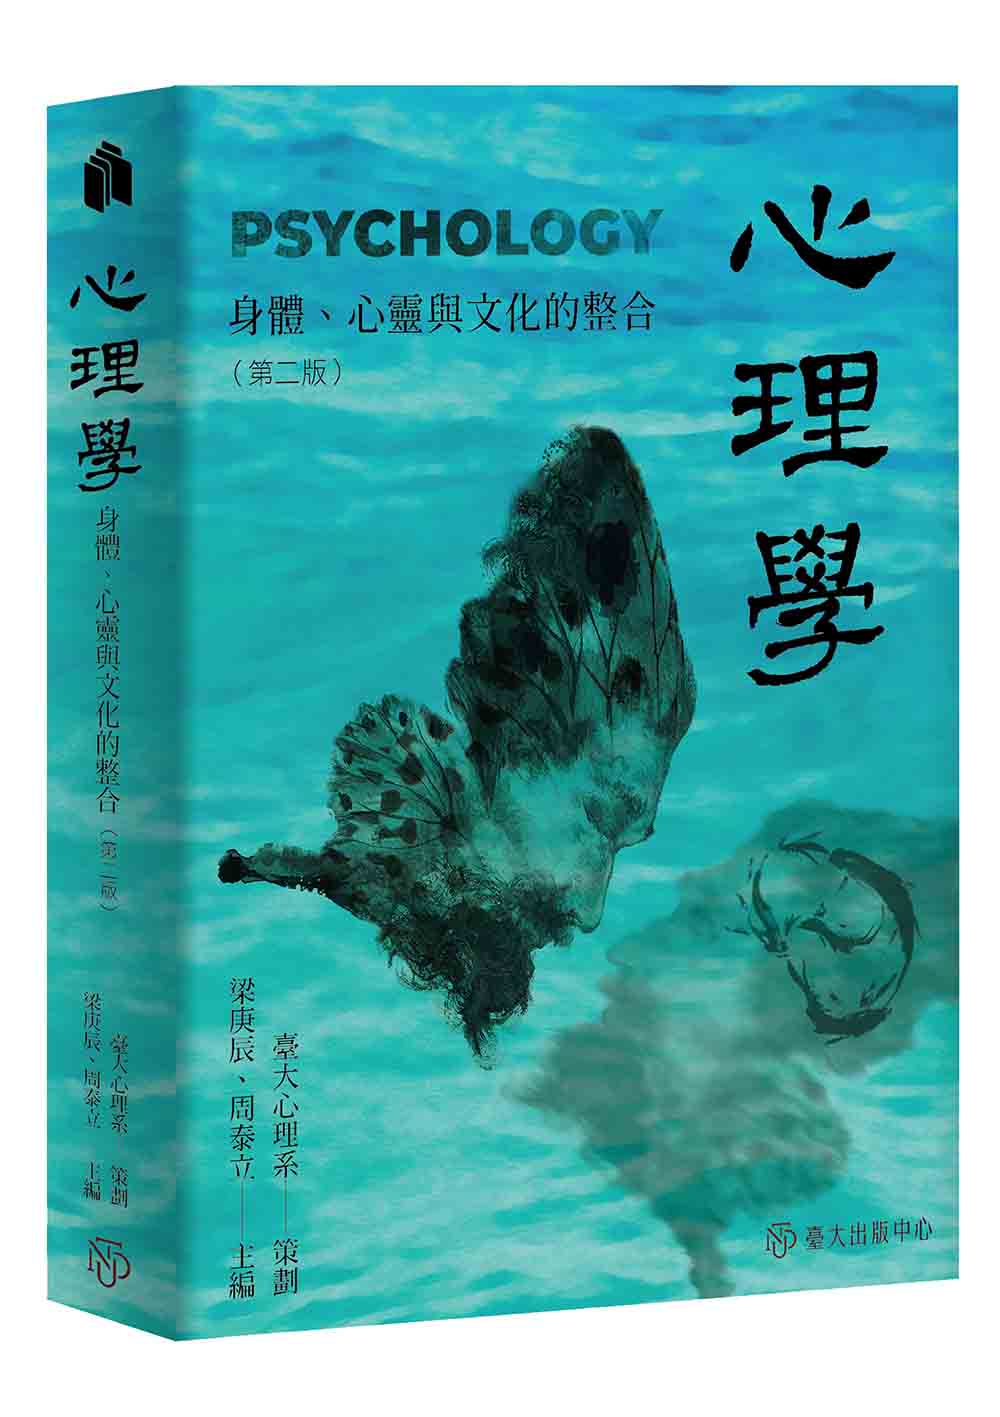 Psychology: An Integration of Body, Mind and Culture (Second Edition)